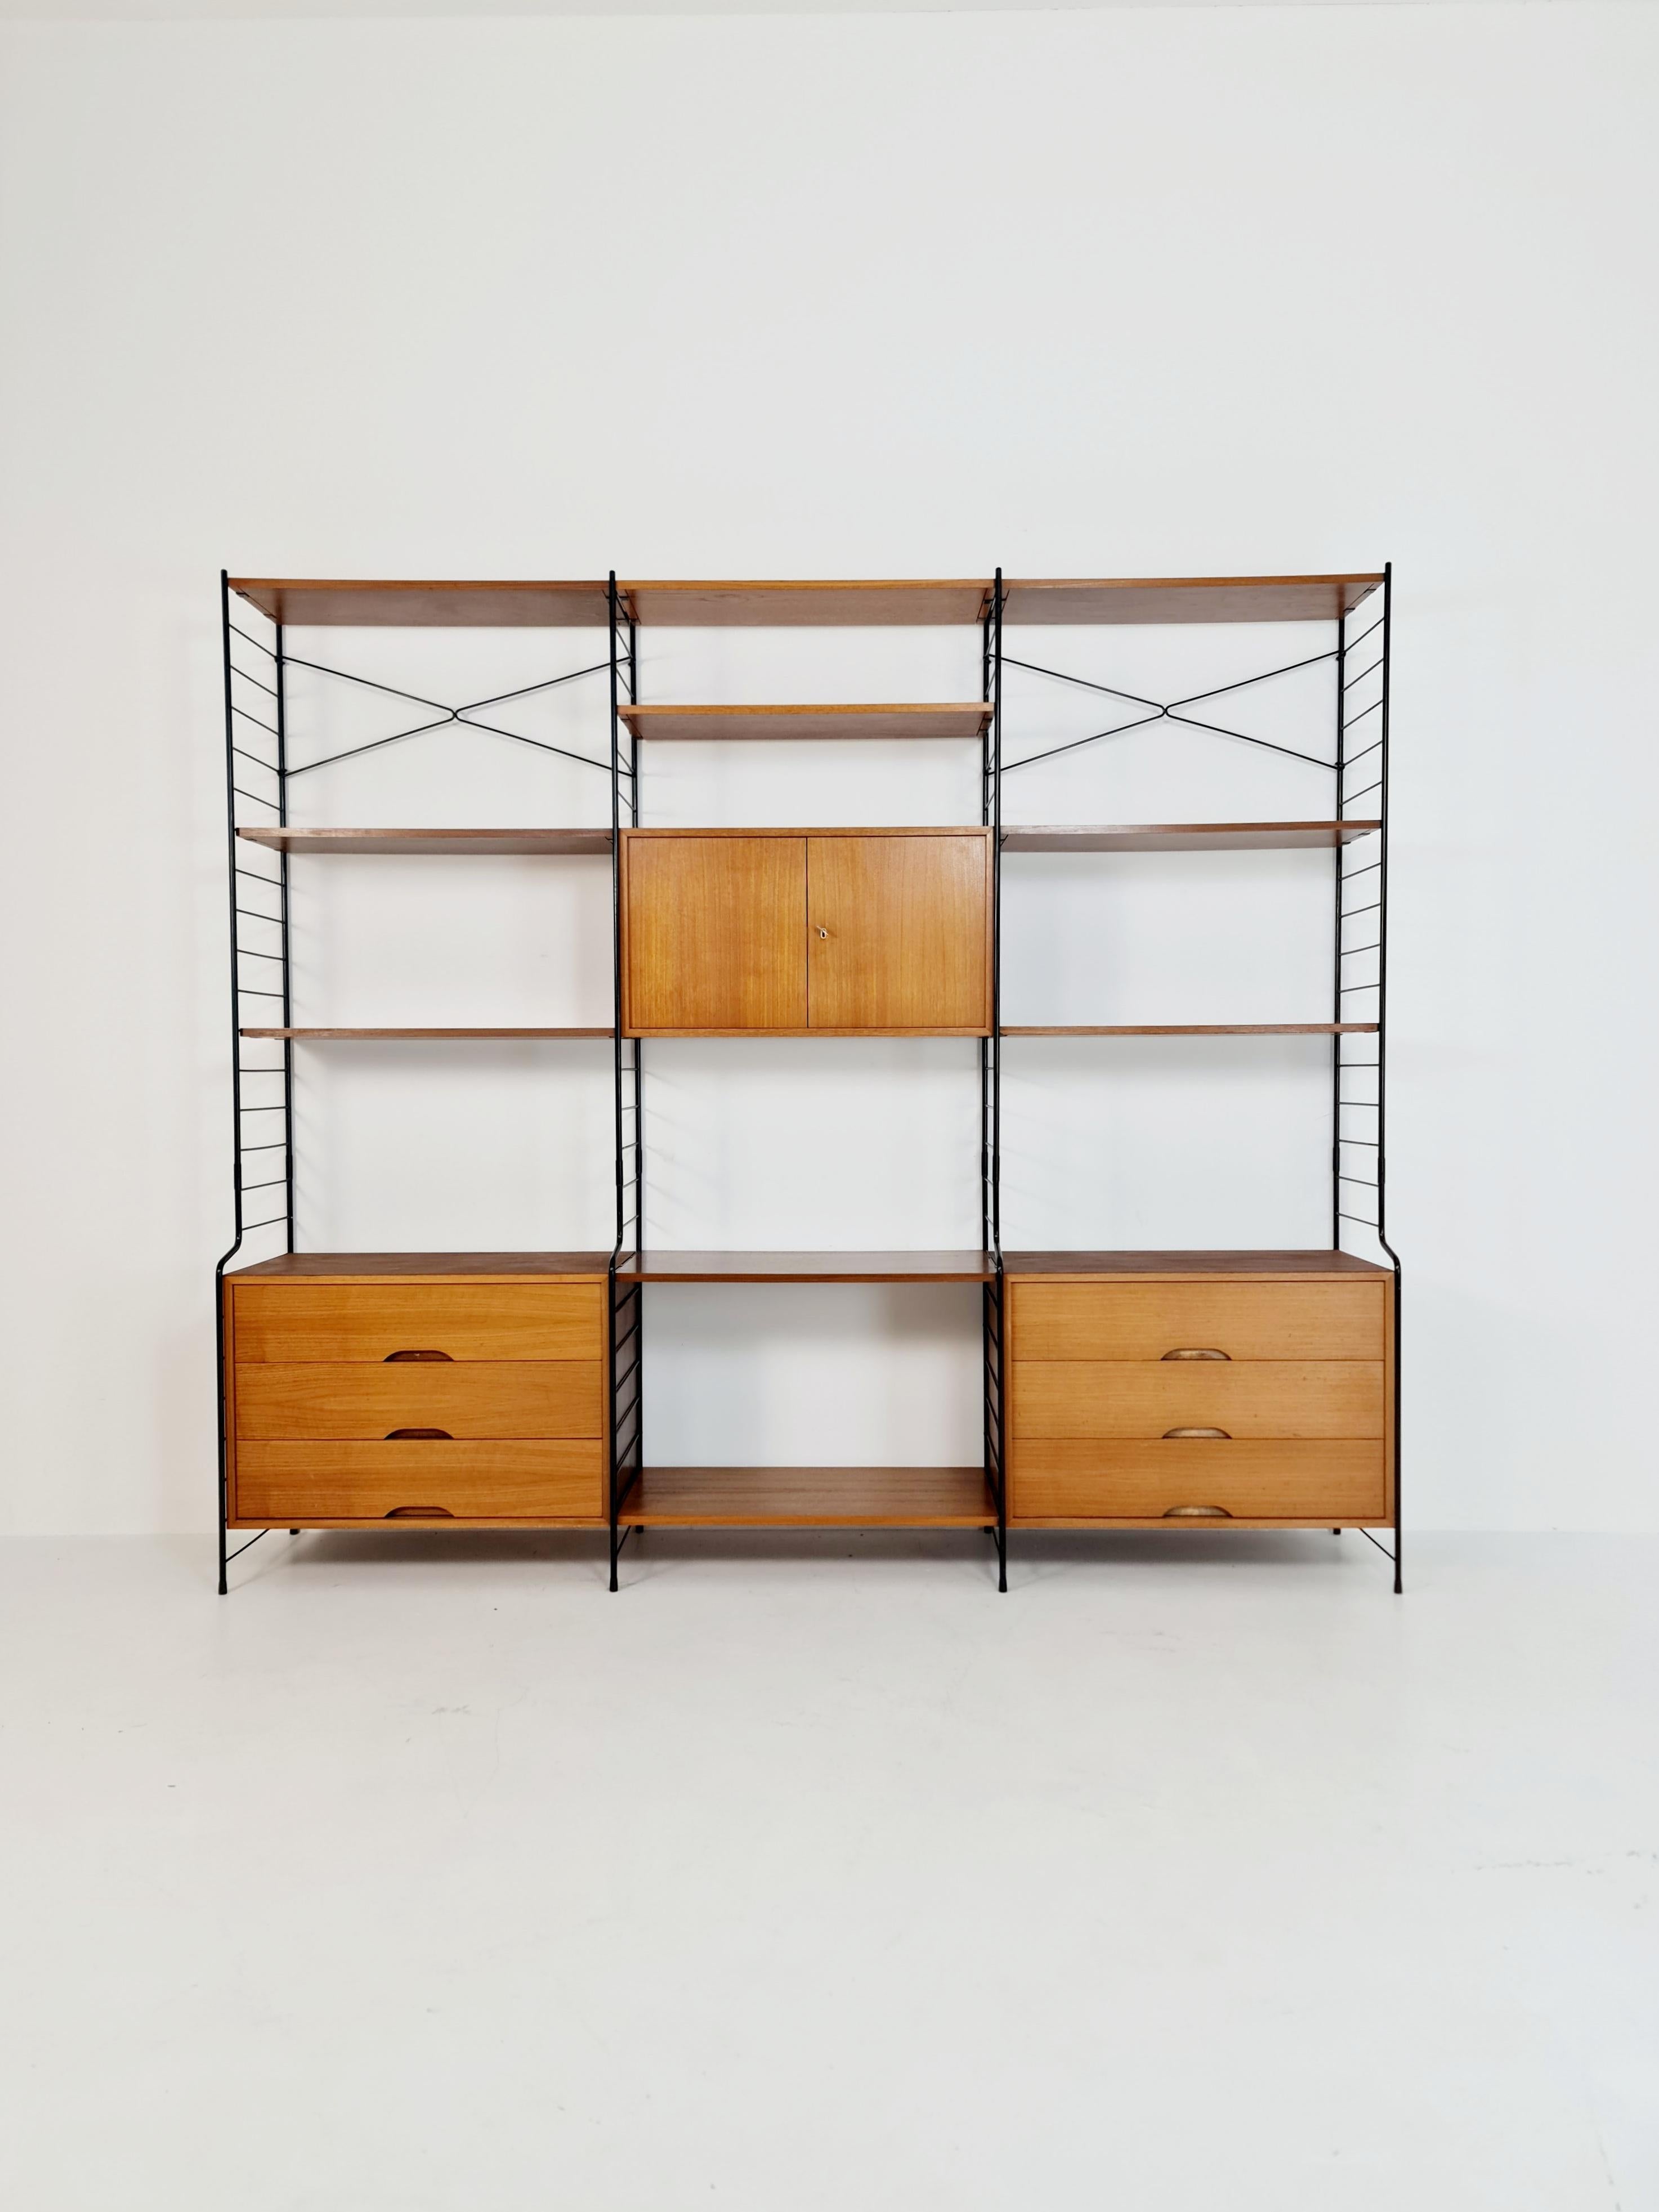 a very unique and wonderful String shelving system unite made of Teak wood by WHB Deutschland, 1960s

Dimentions:

H: 190 cm
W: 217 cm
D: 42 cm

The height of the base cabinets is 60 cm



worldwide shipping.